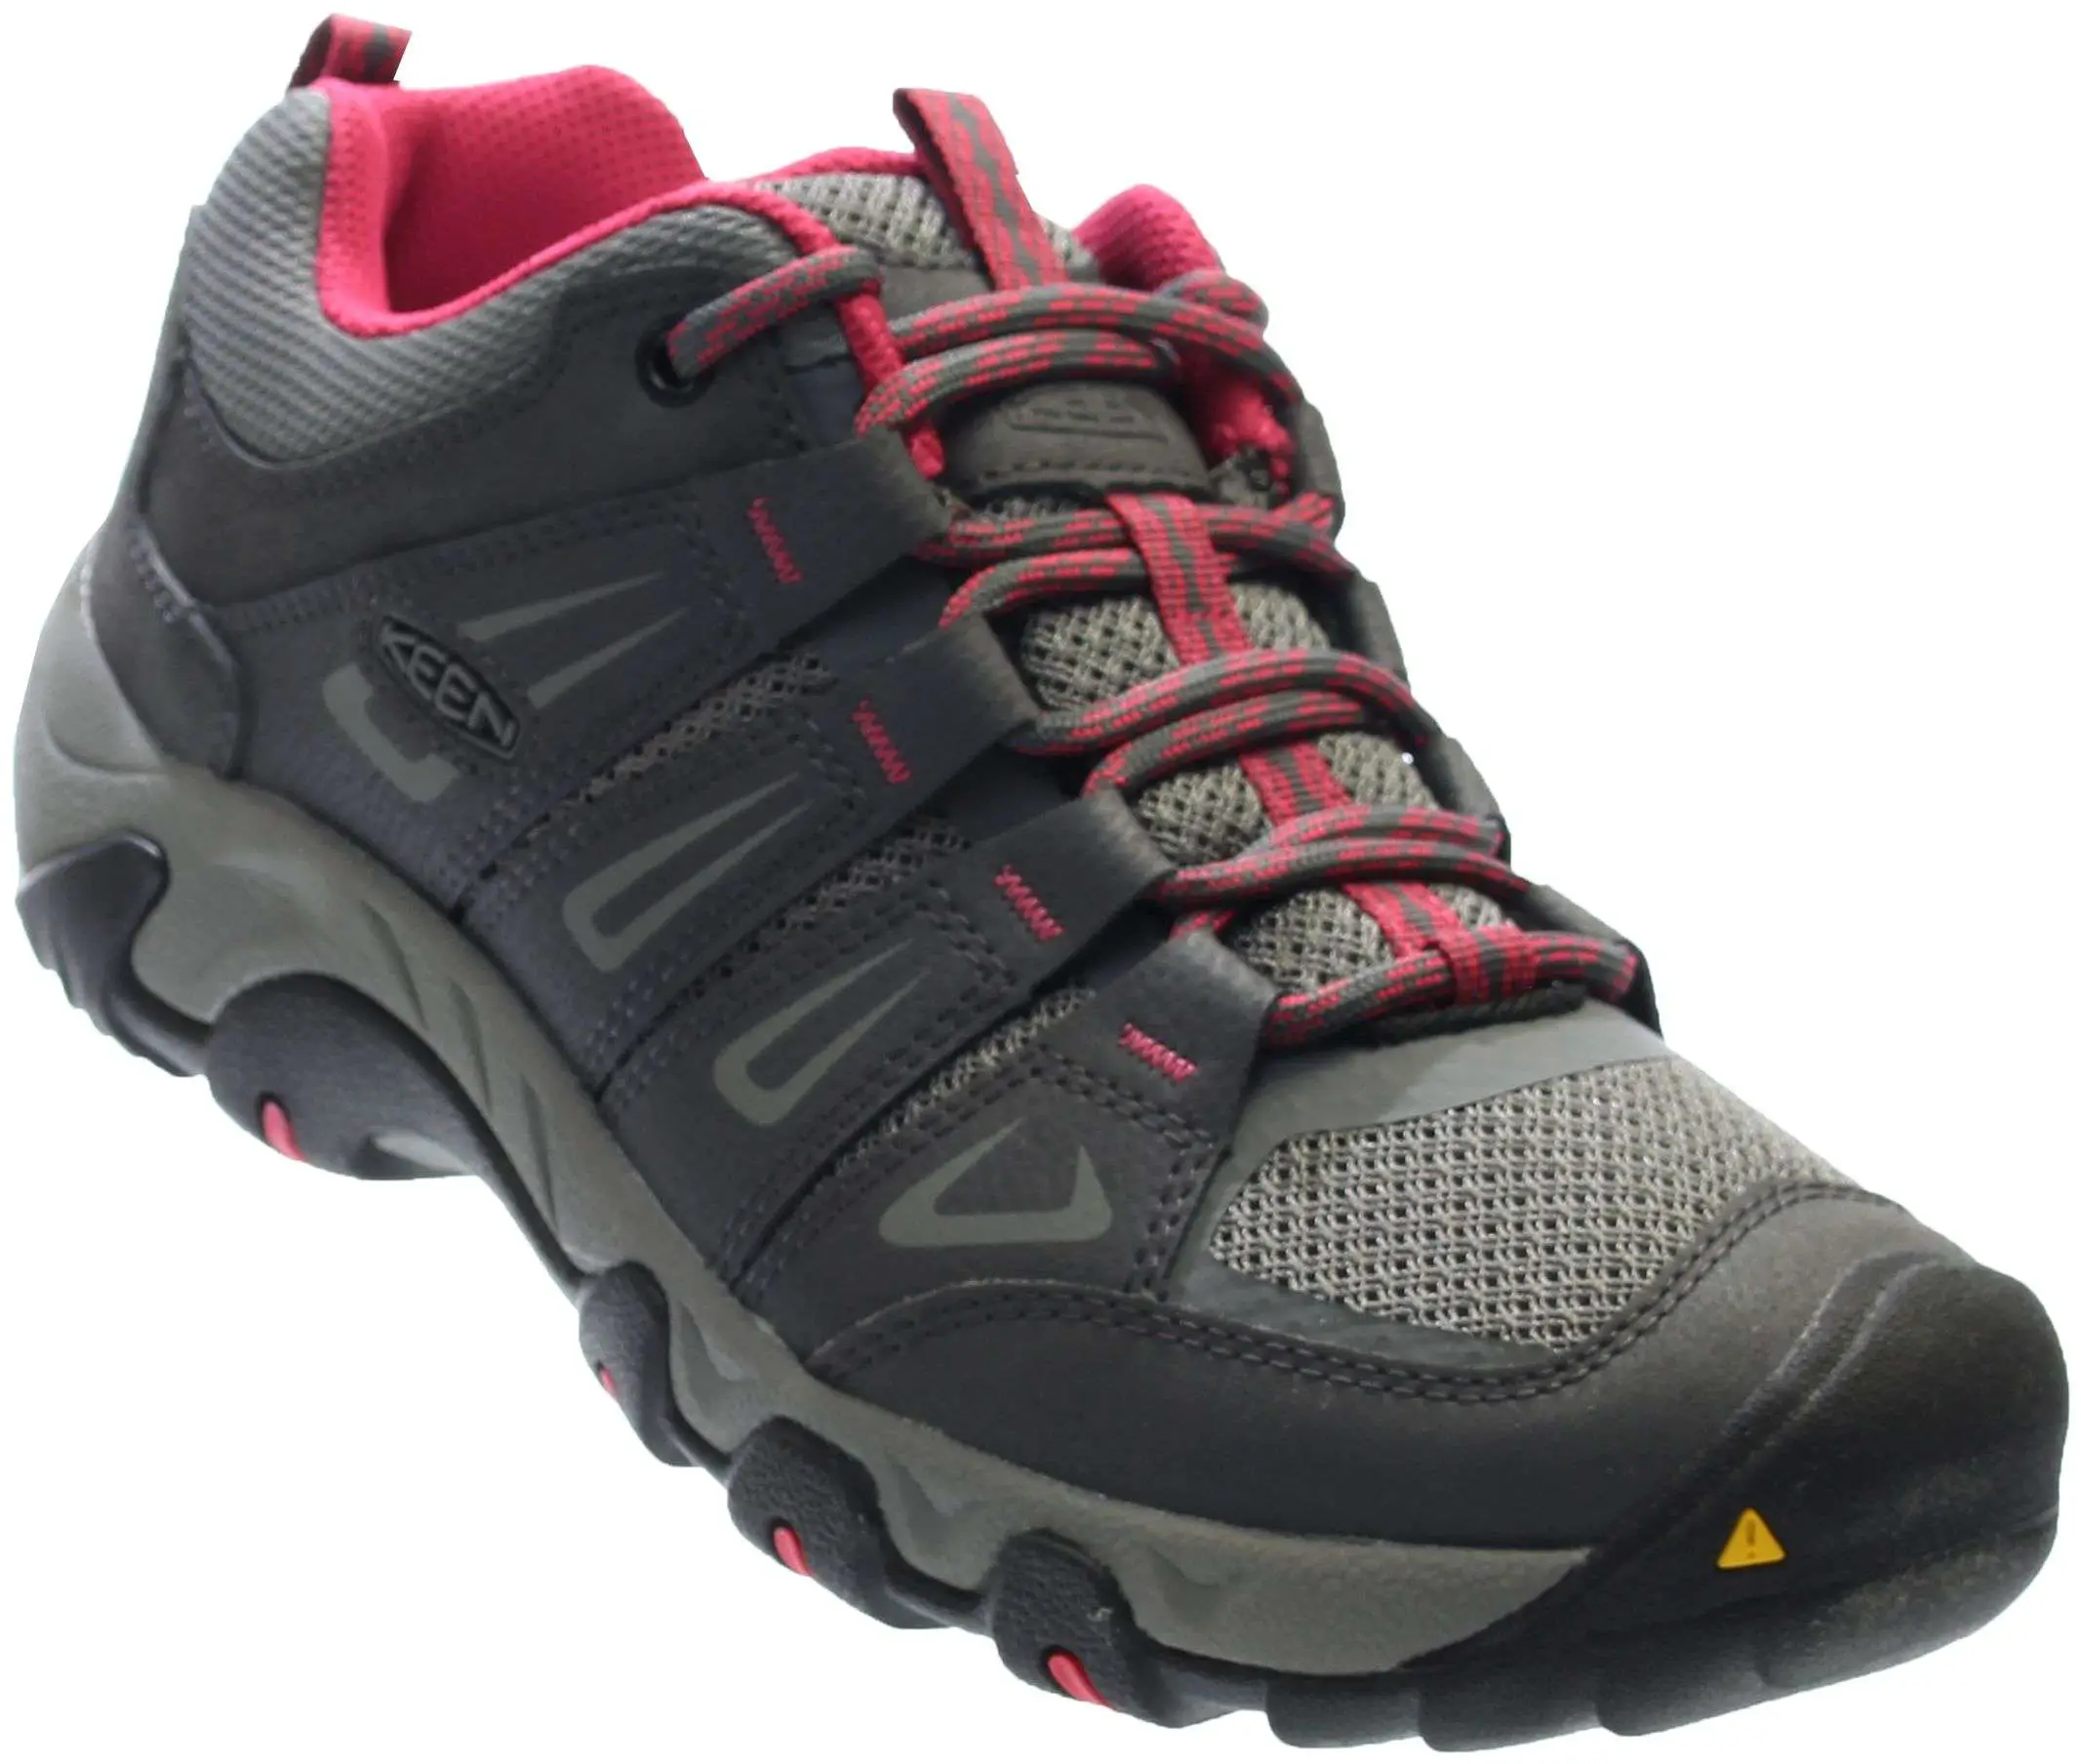 Shop our huge selection of low price Keen Hiking Boots and ...